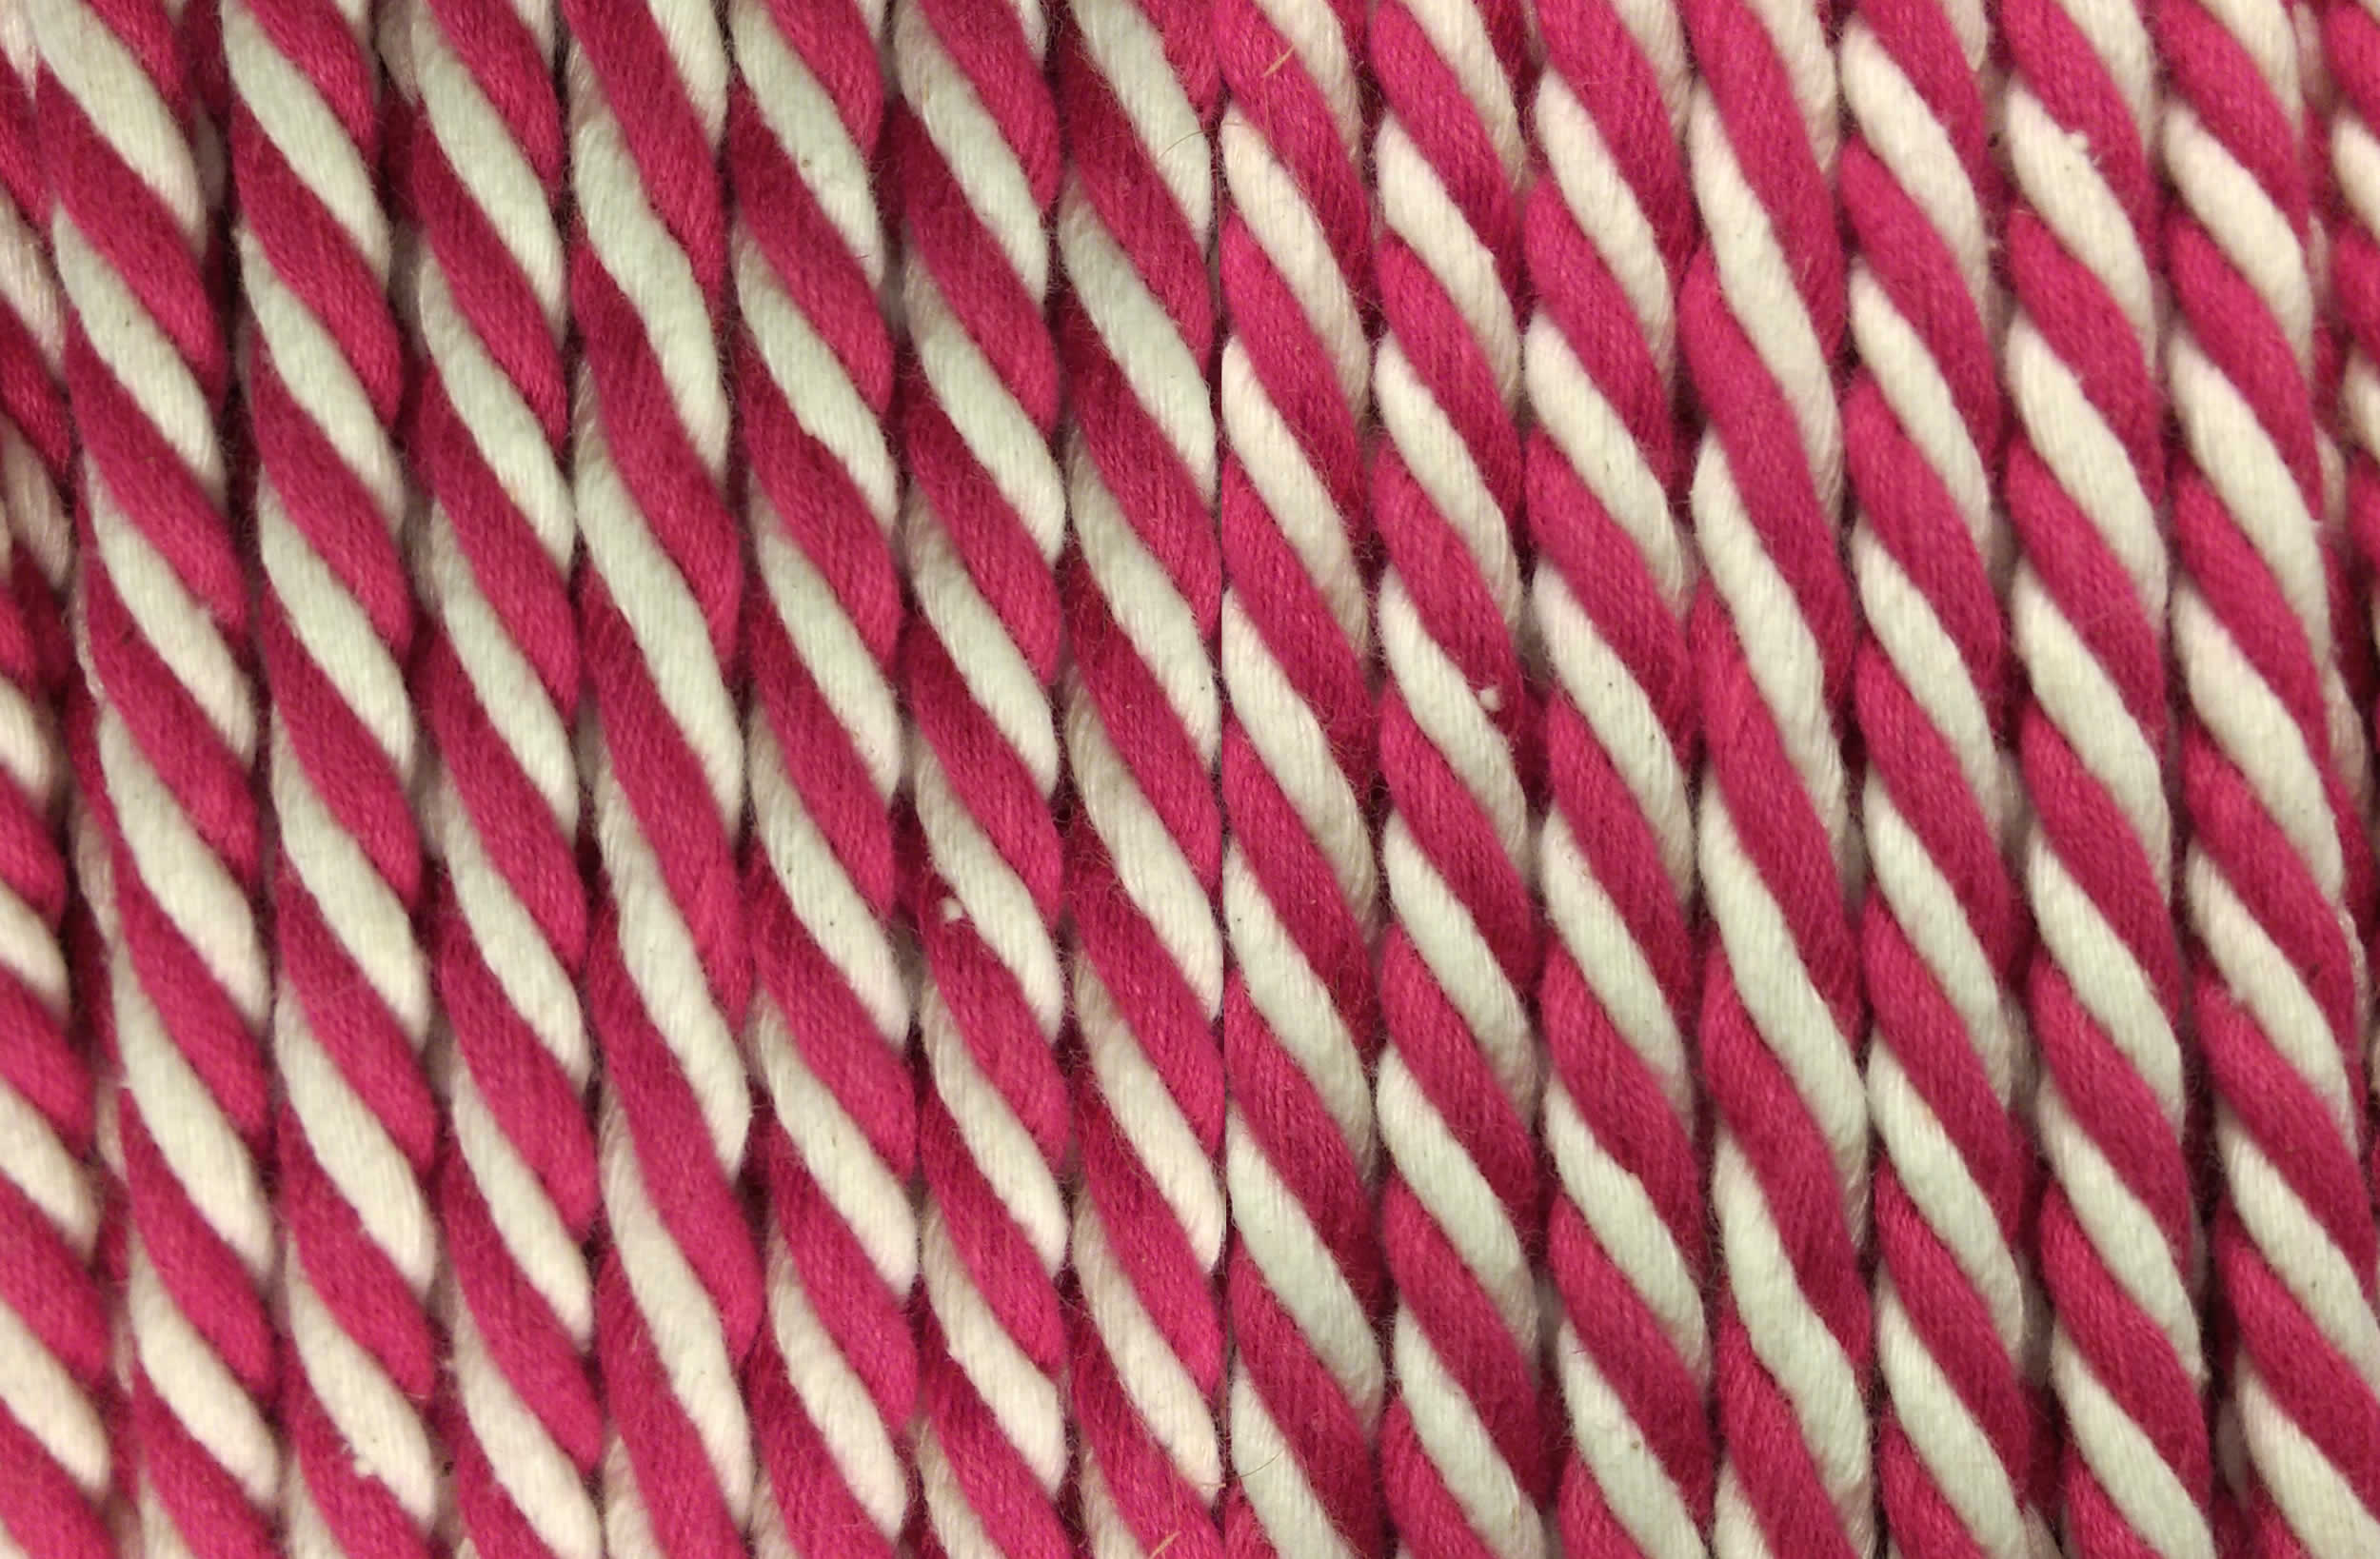 Pink Striped Cord | Pink and White Striped Rope 